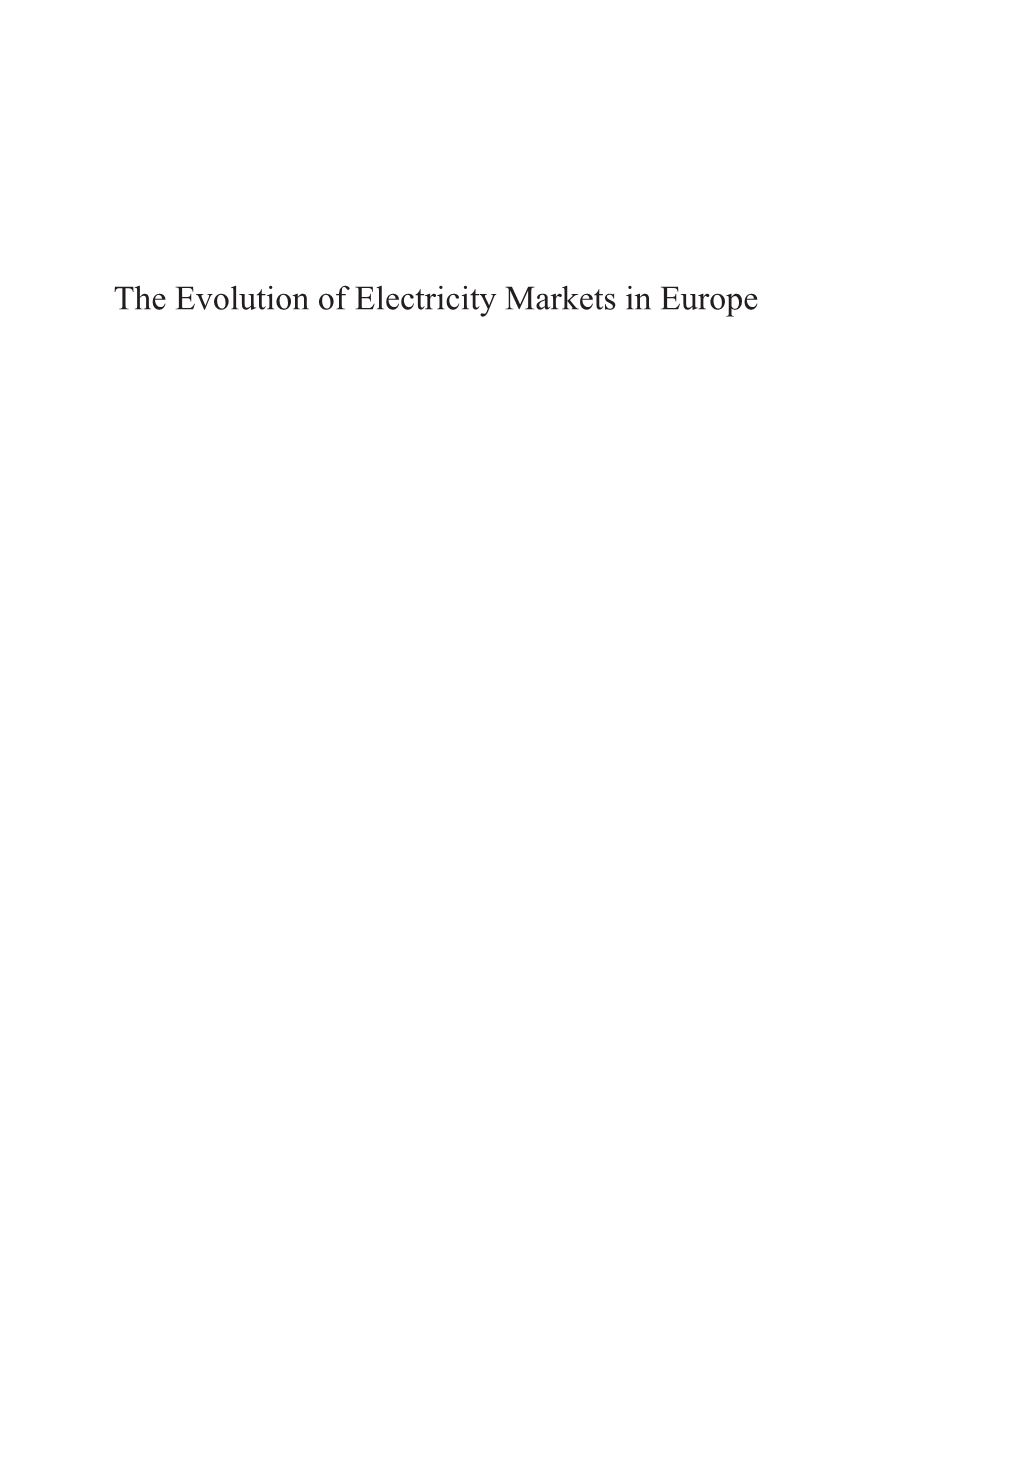 The Evolution of Electricity Markets in Europe